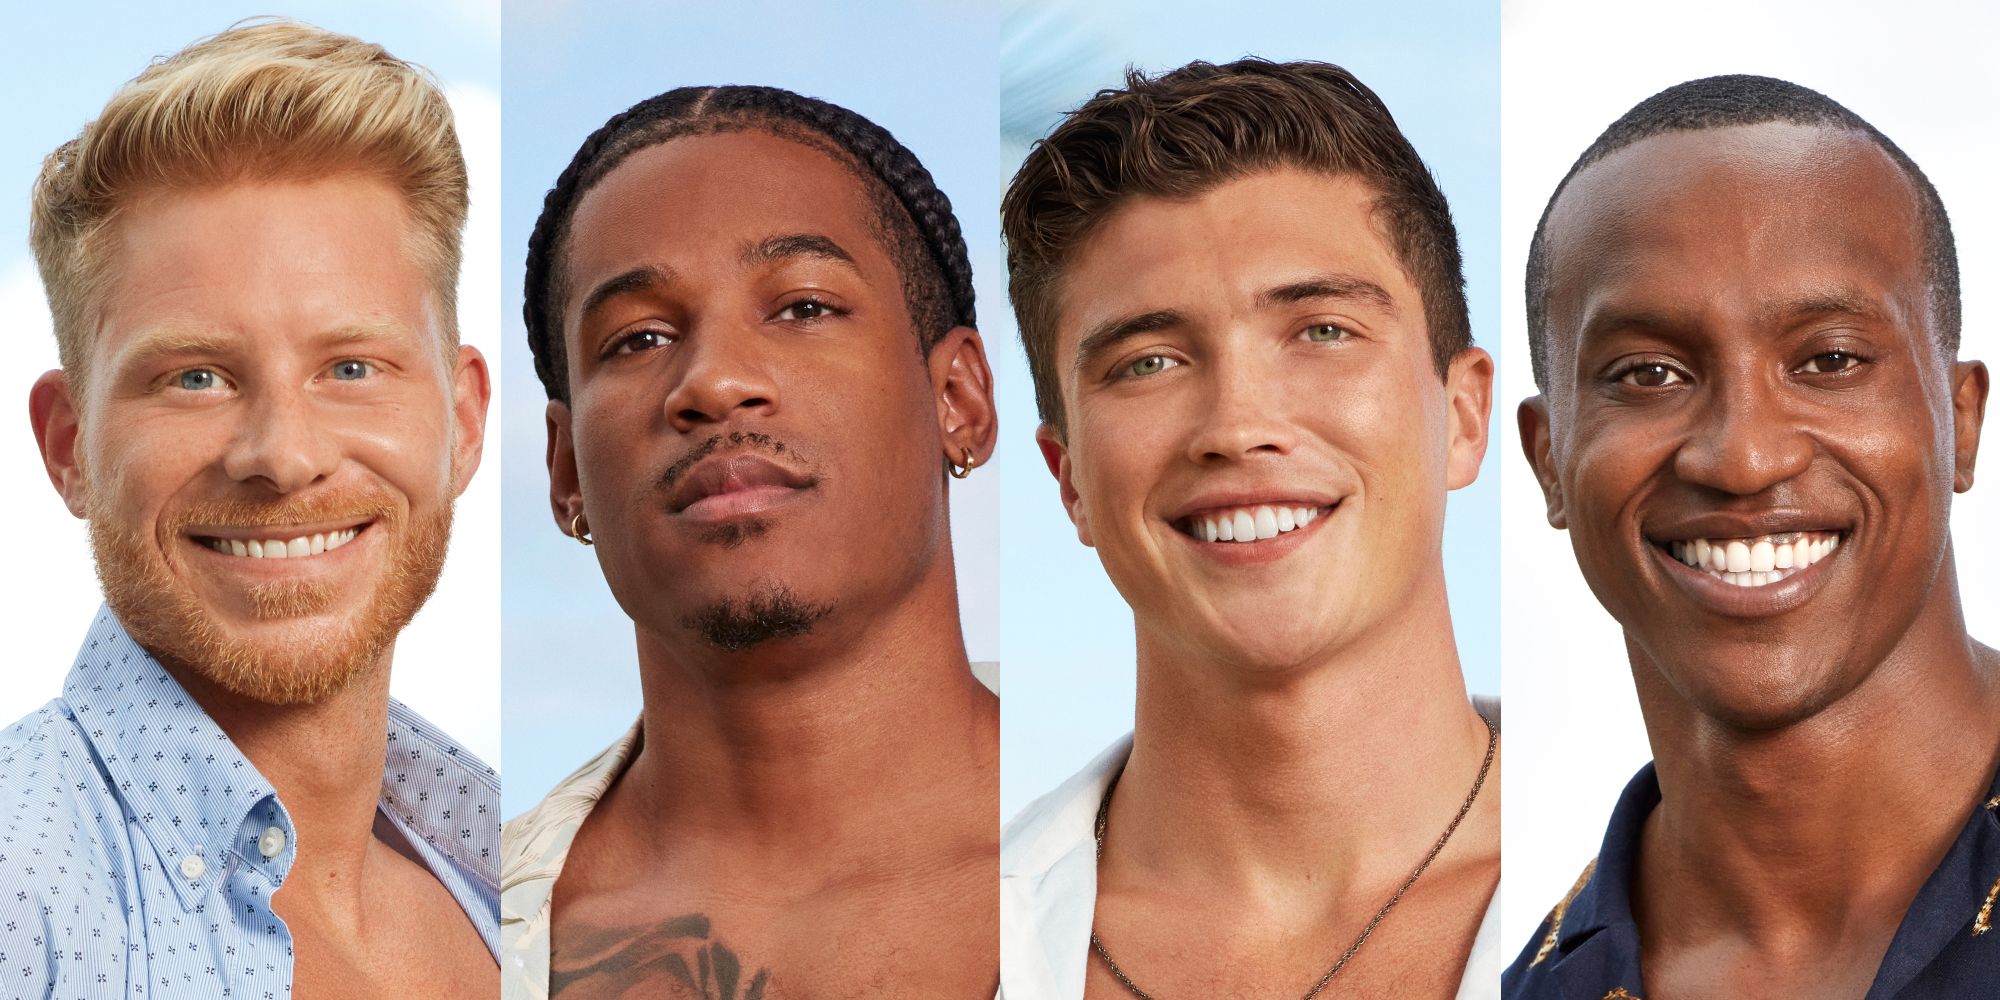 Andrew Kujawski, Tevin Lopez, Tommy Soltis, and Evan Favors on Temptation Island season 4